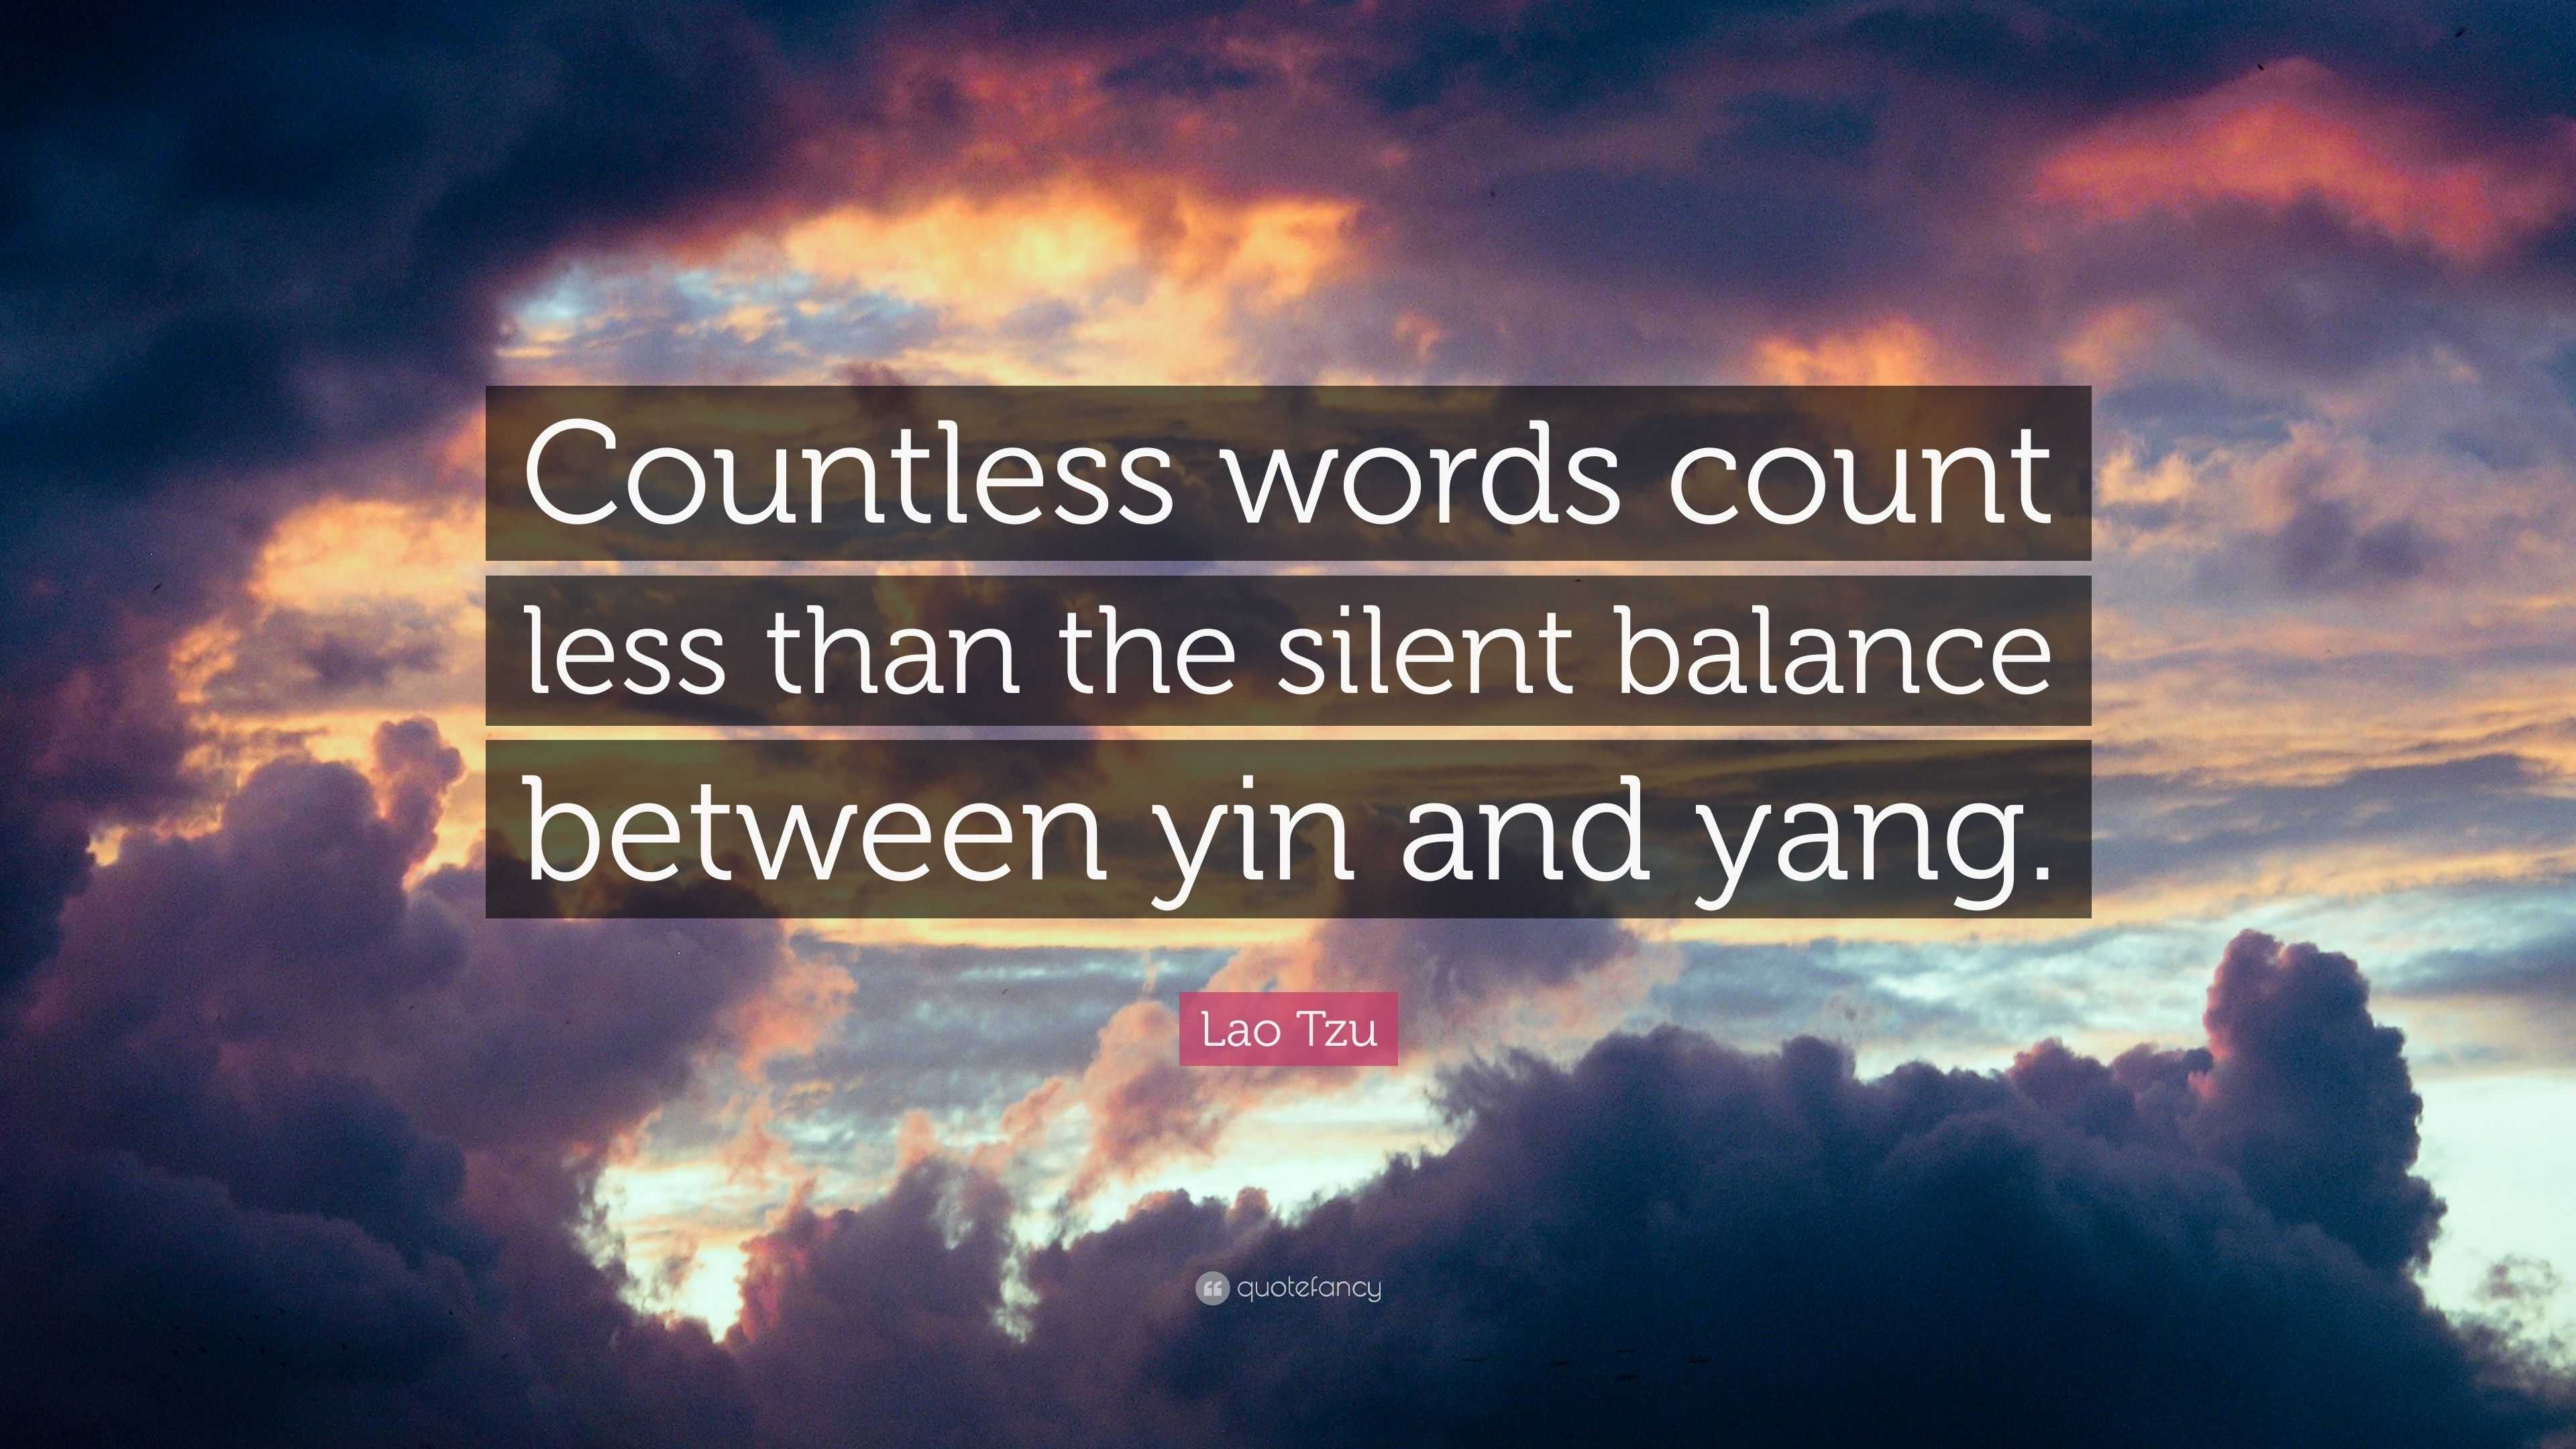 Lao Tzu Quote: “Countless words count less than the silent balance